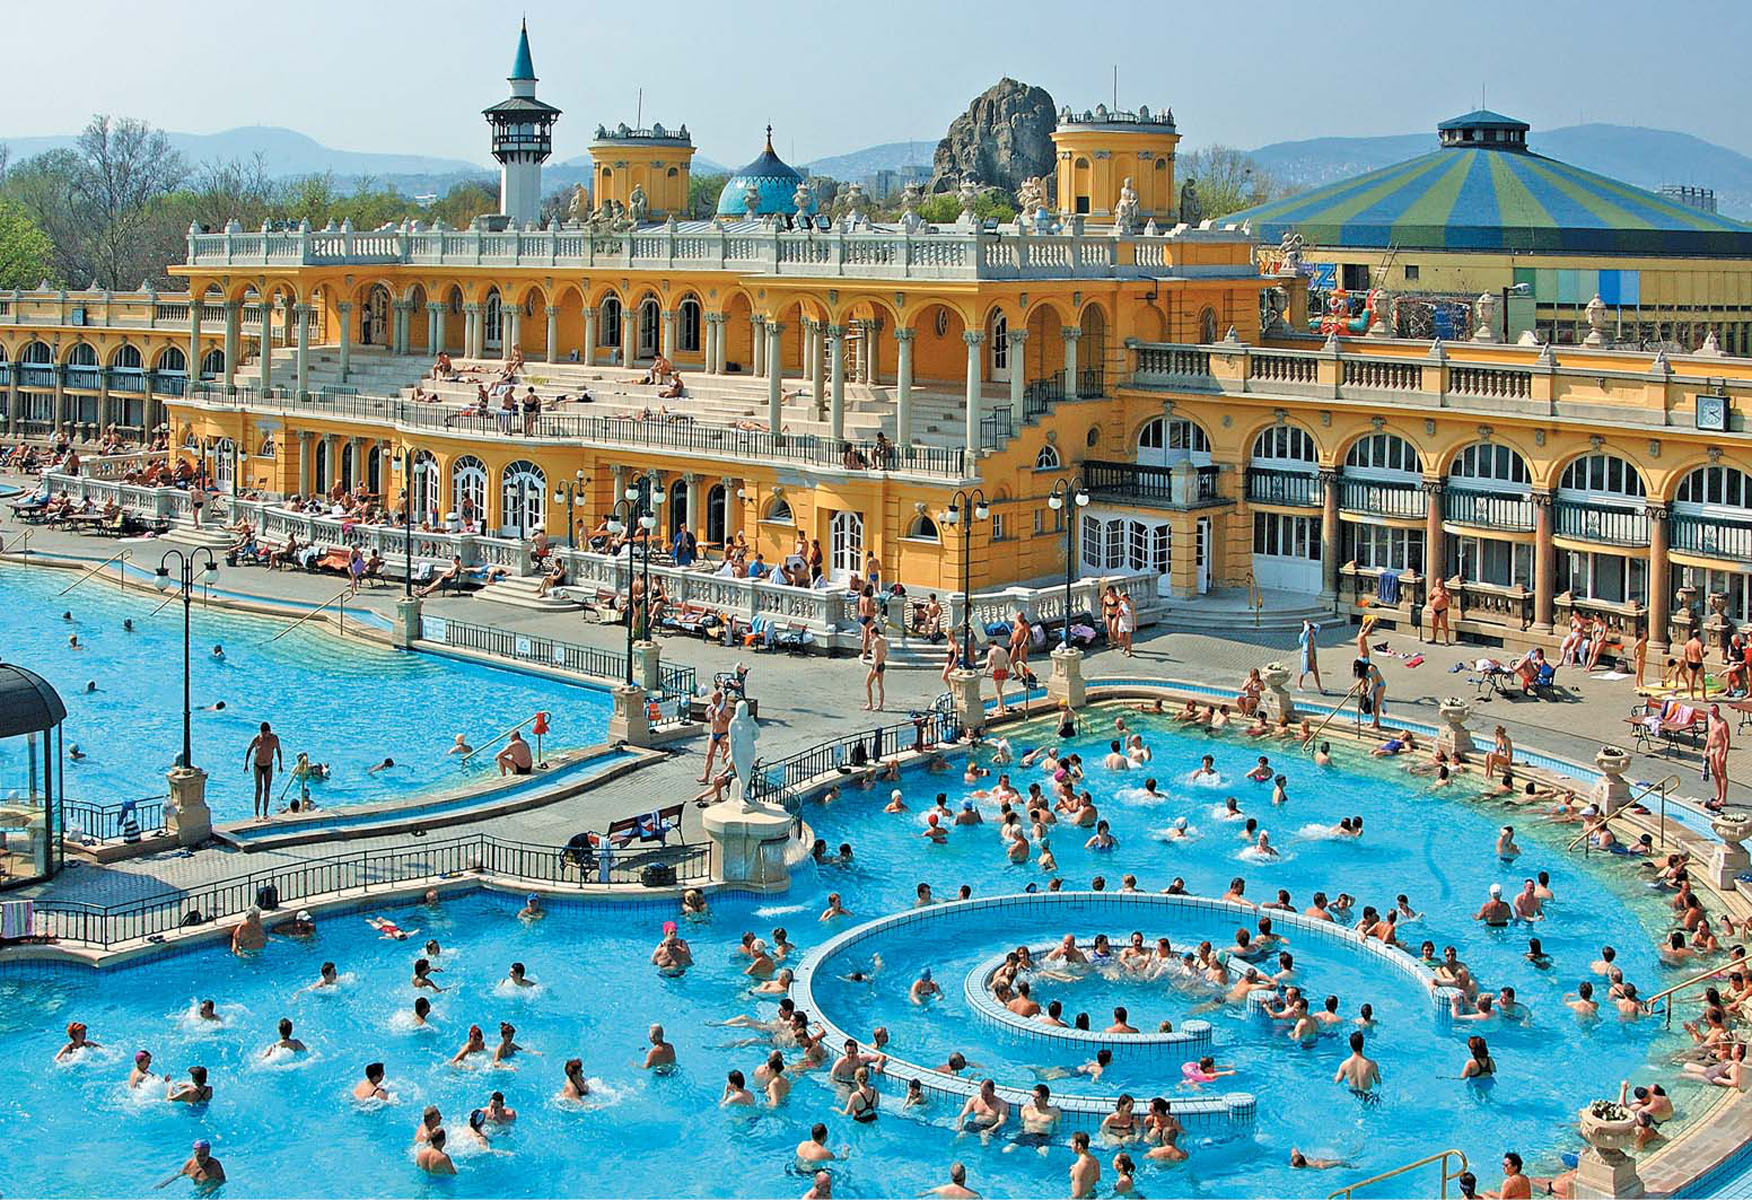 Xploring Hungary: One of the Largest Thermal Water Reserves in the World